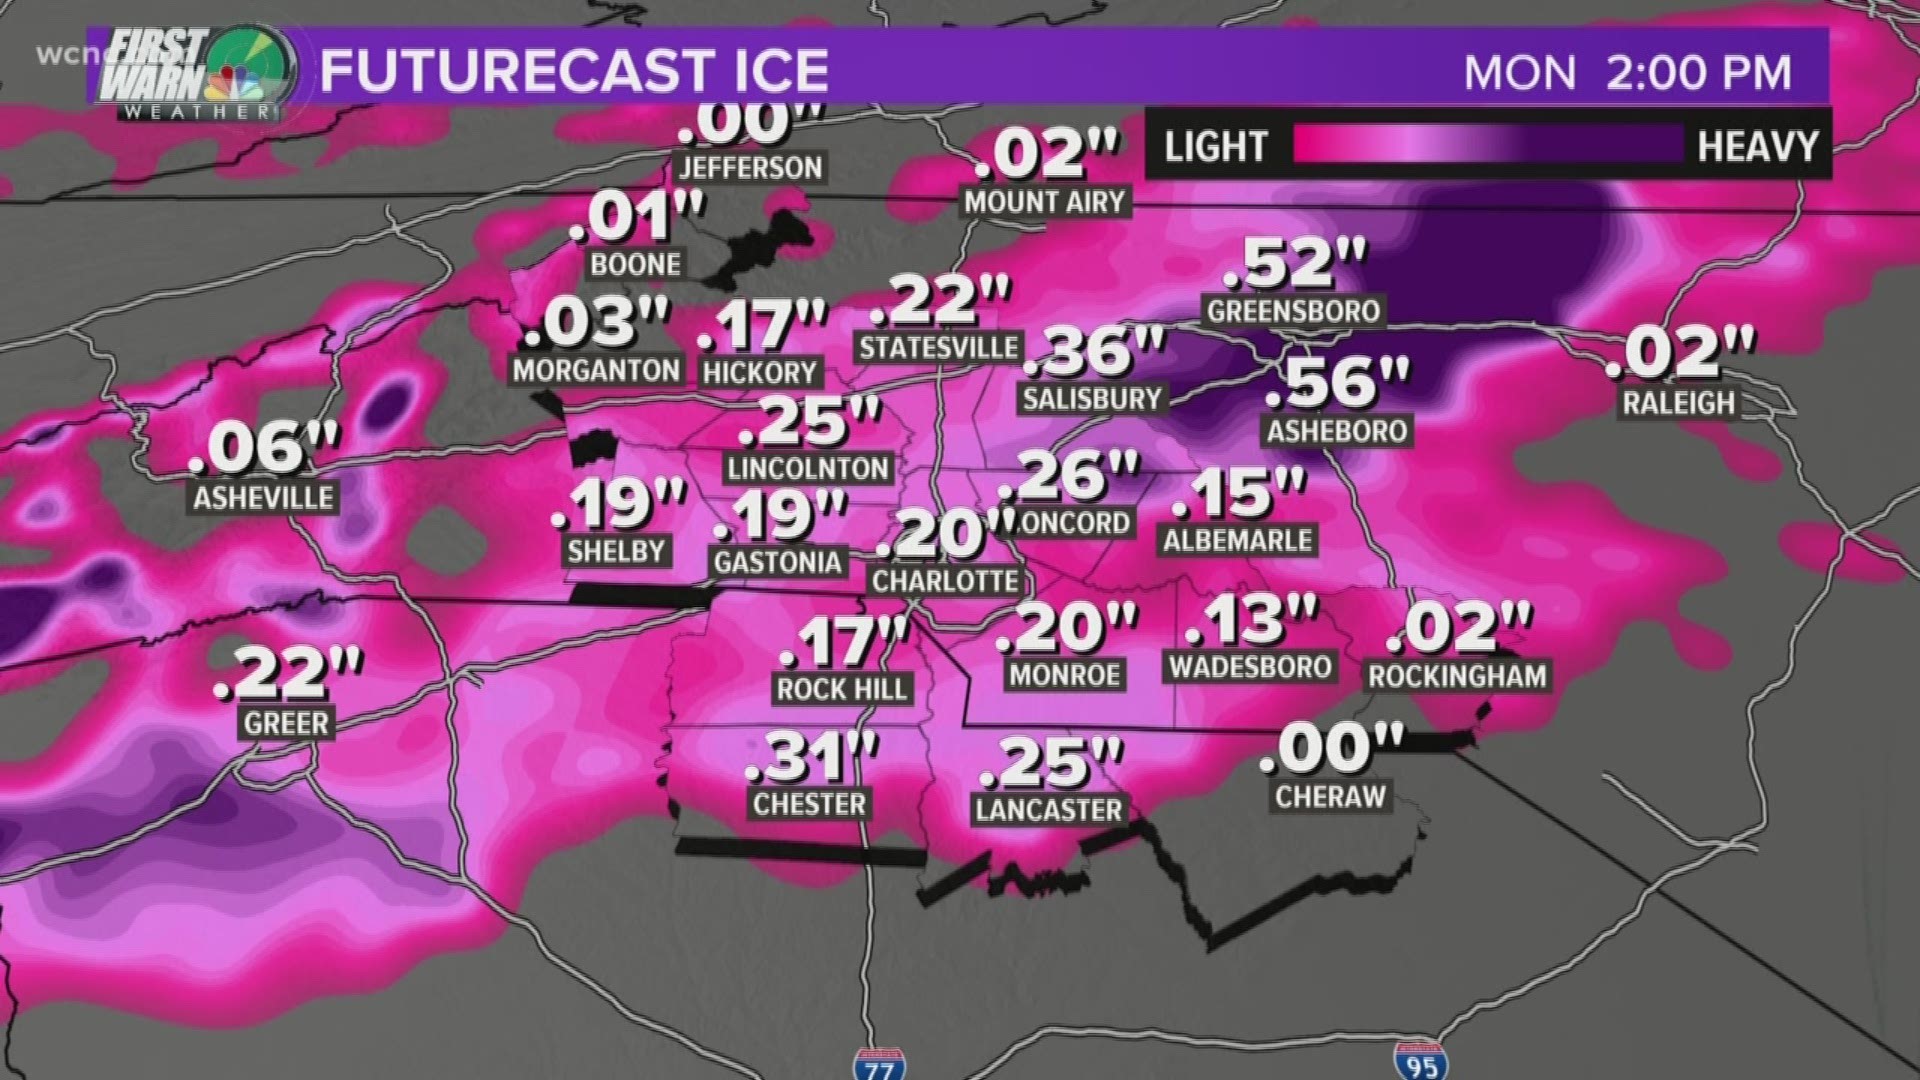 Rain and ice are the biggest threats for Charlotte this weekend.